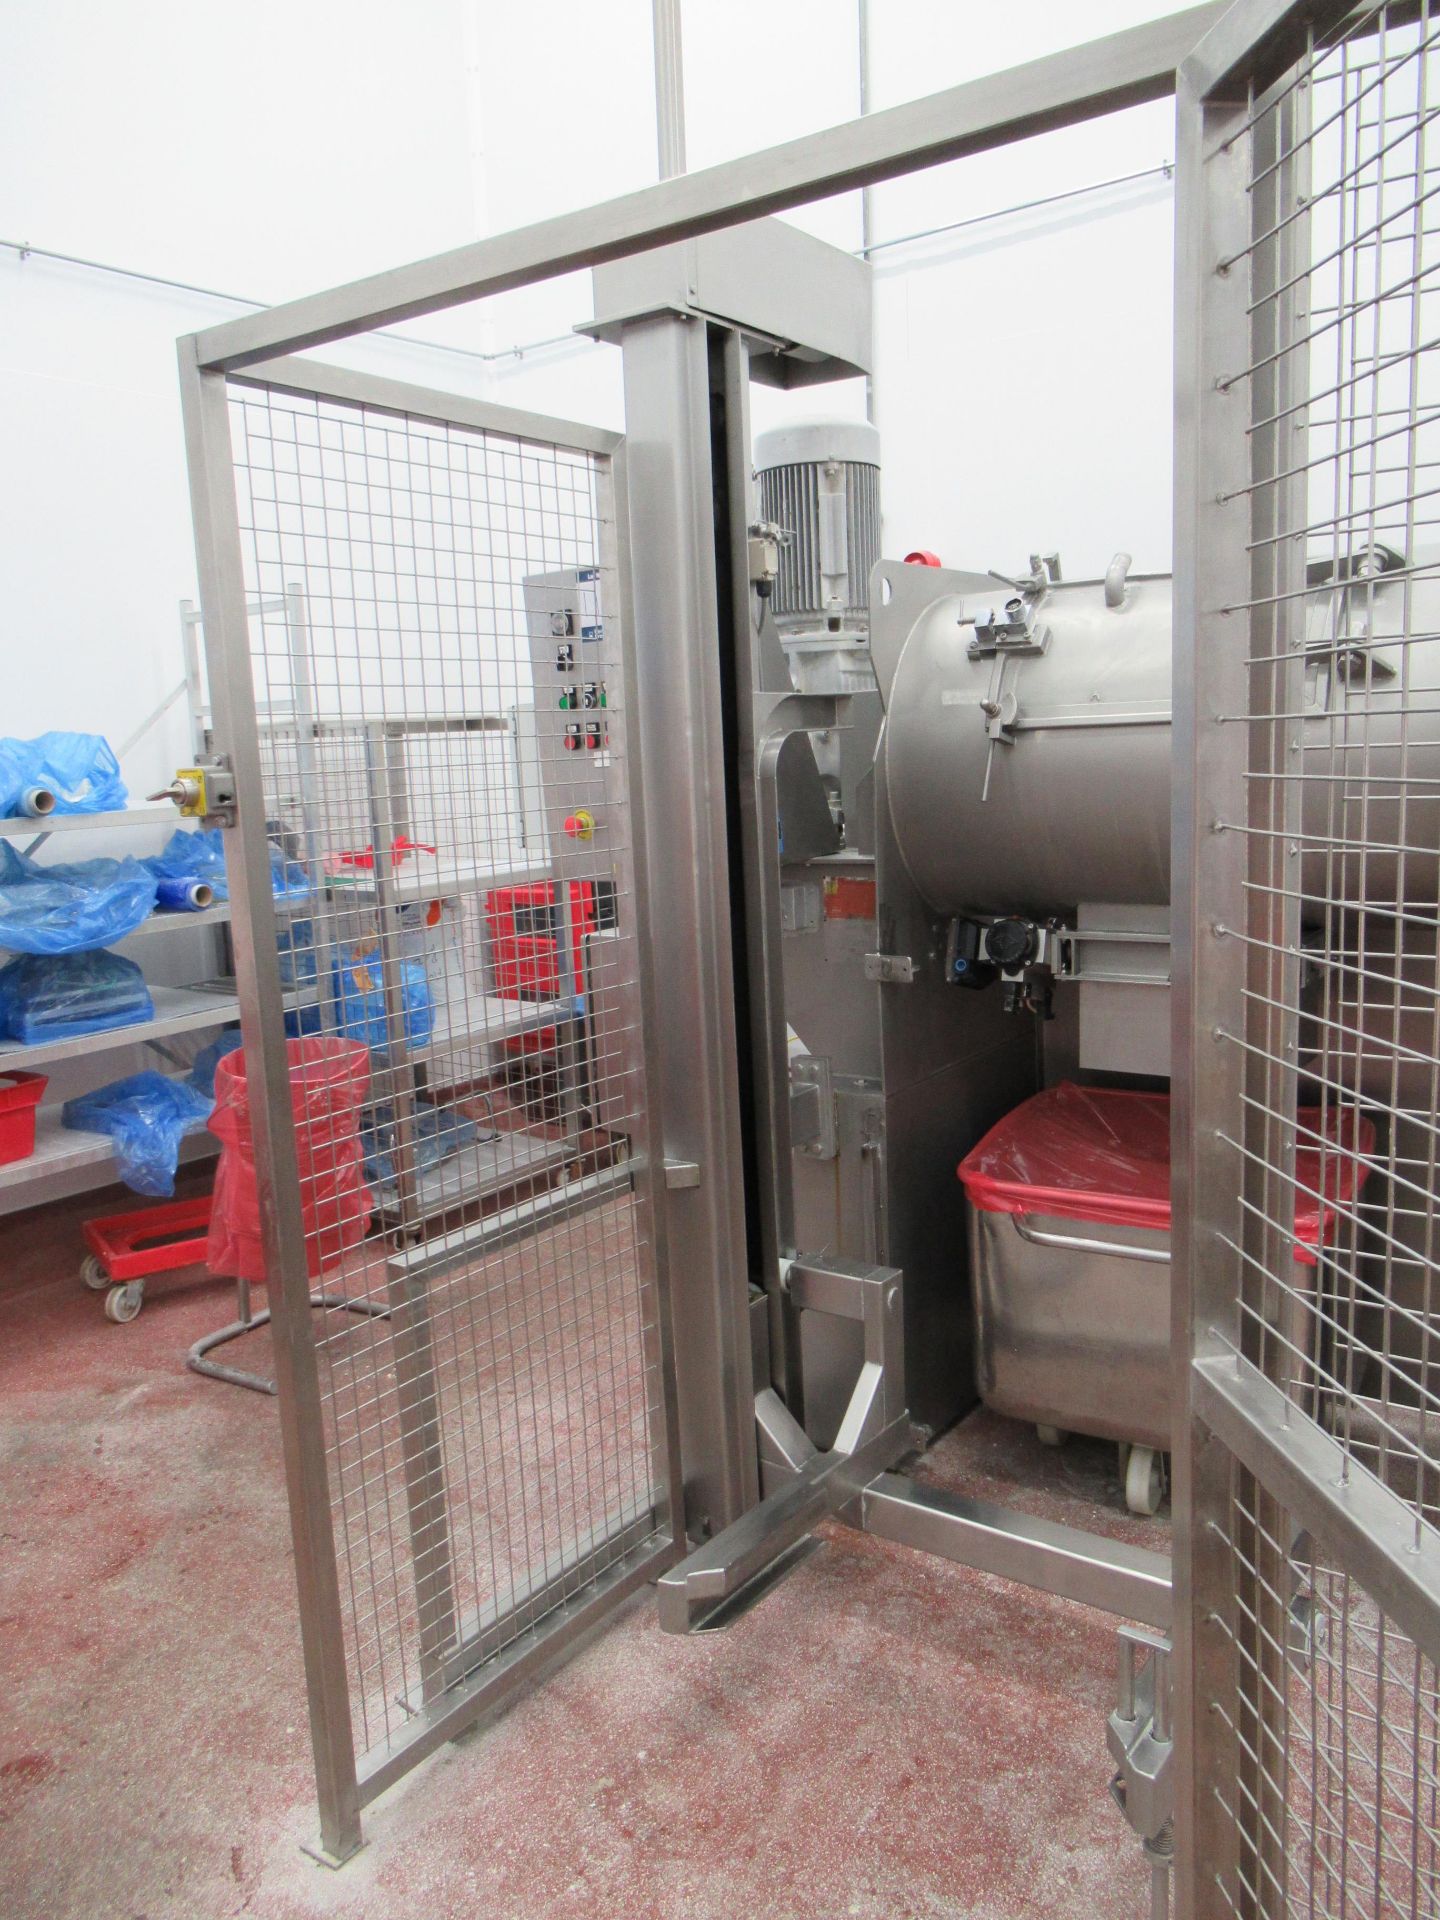 Winkworth RT200 stainless steel mixer Serial no: 16497 (2001) tare weight 1080kg, with fixed Base - Image 8 of 14